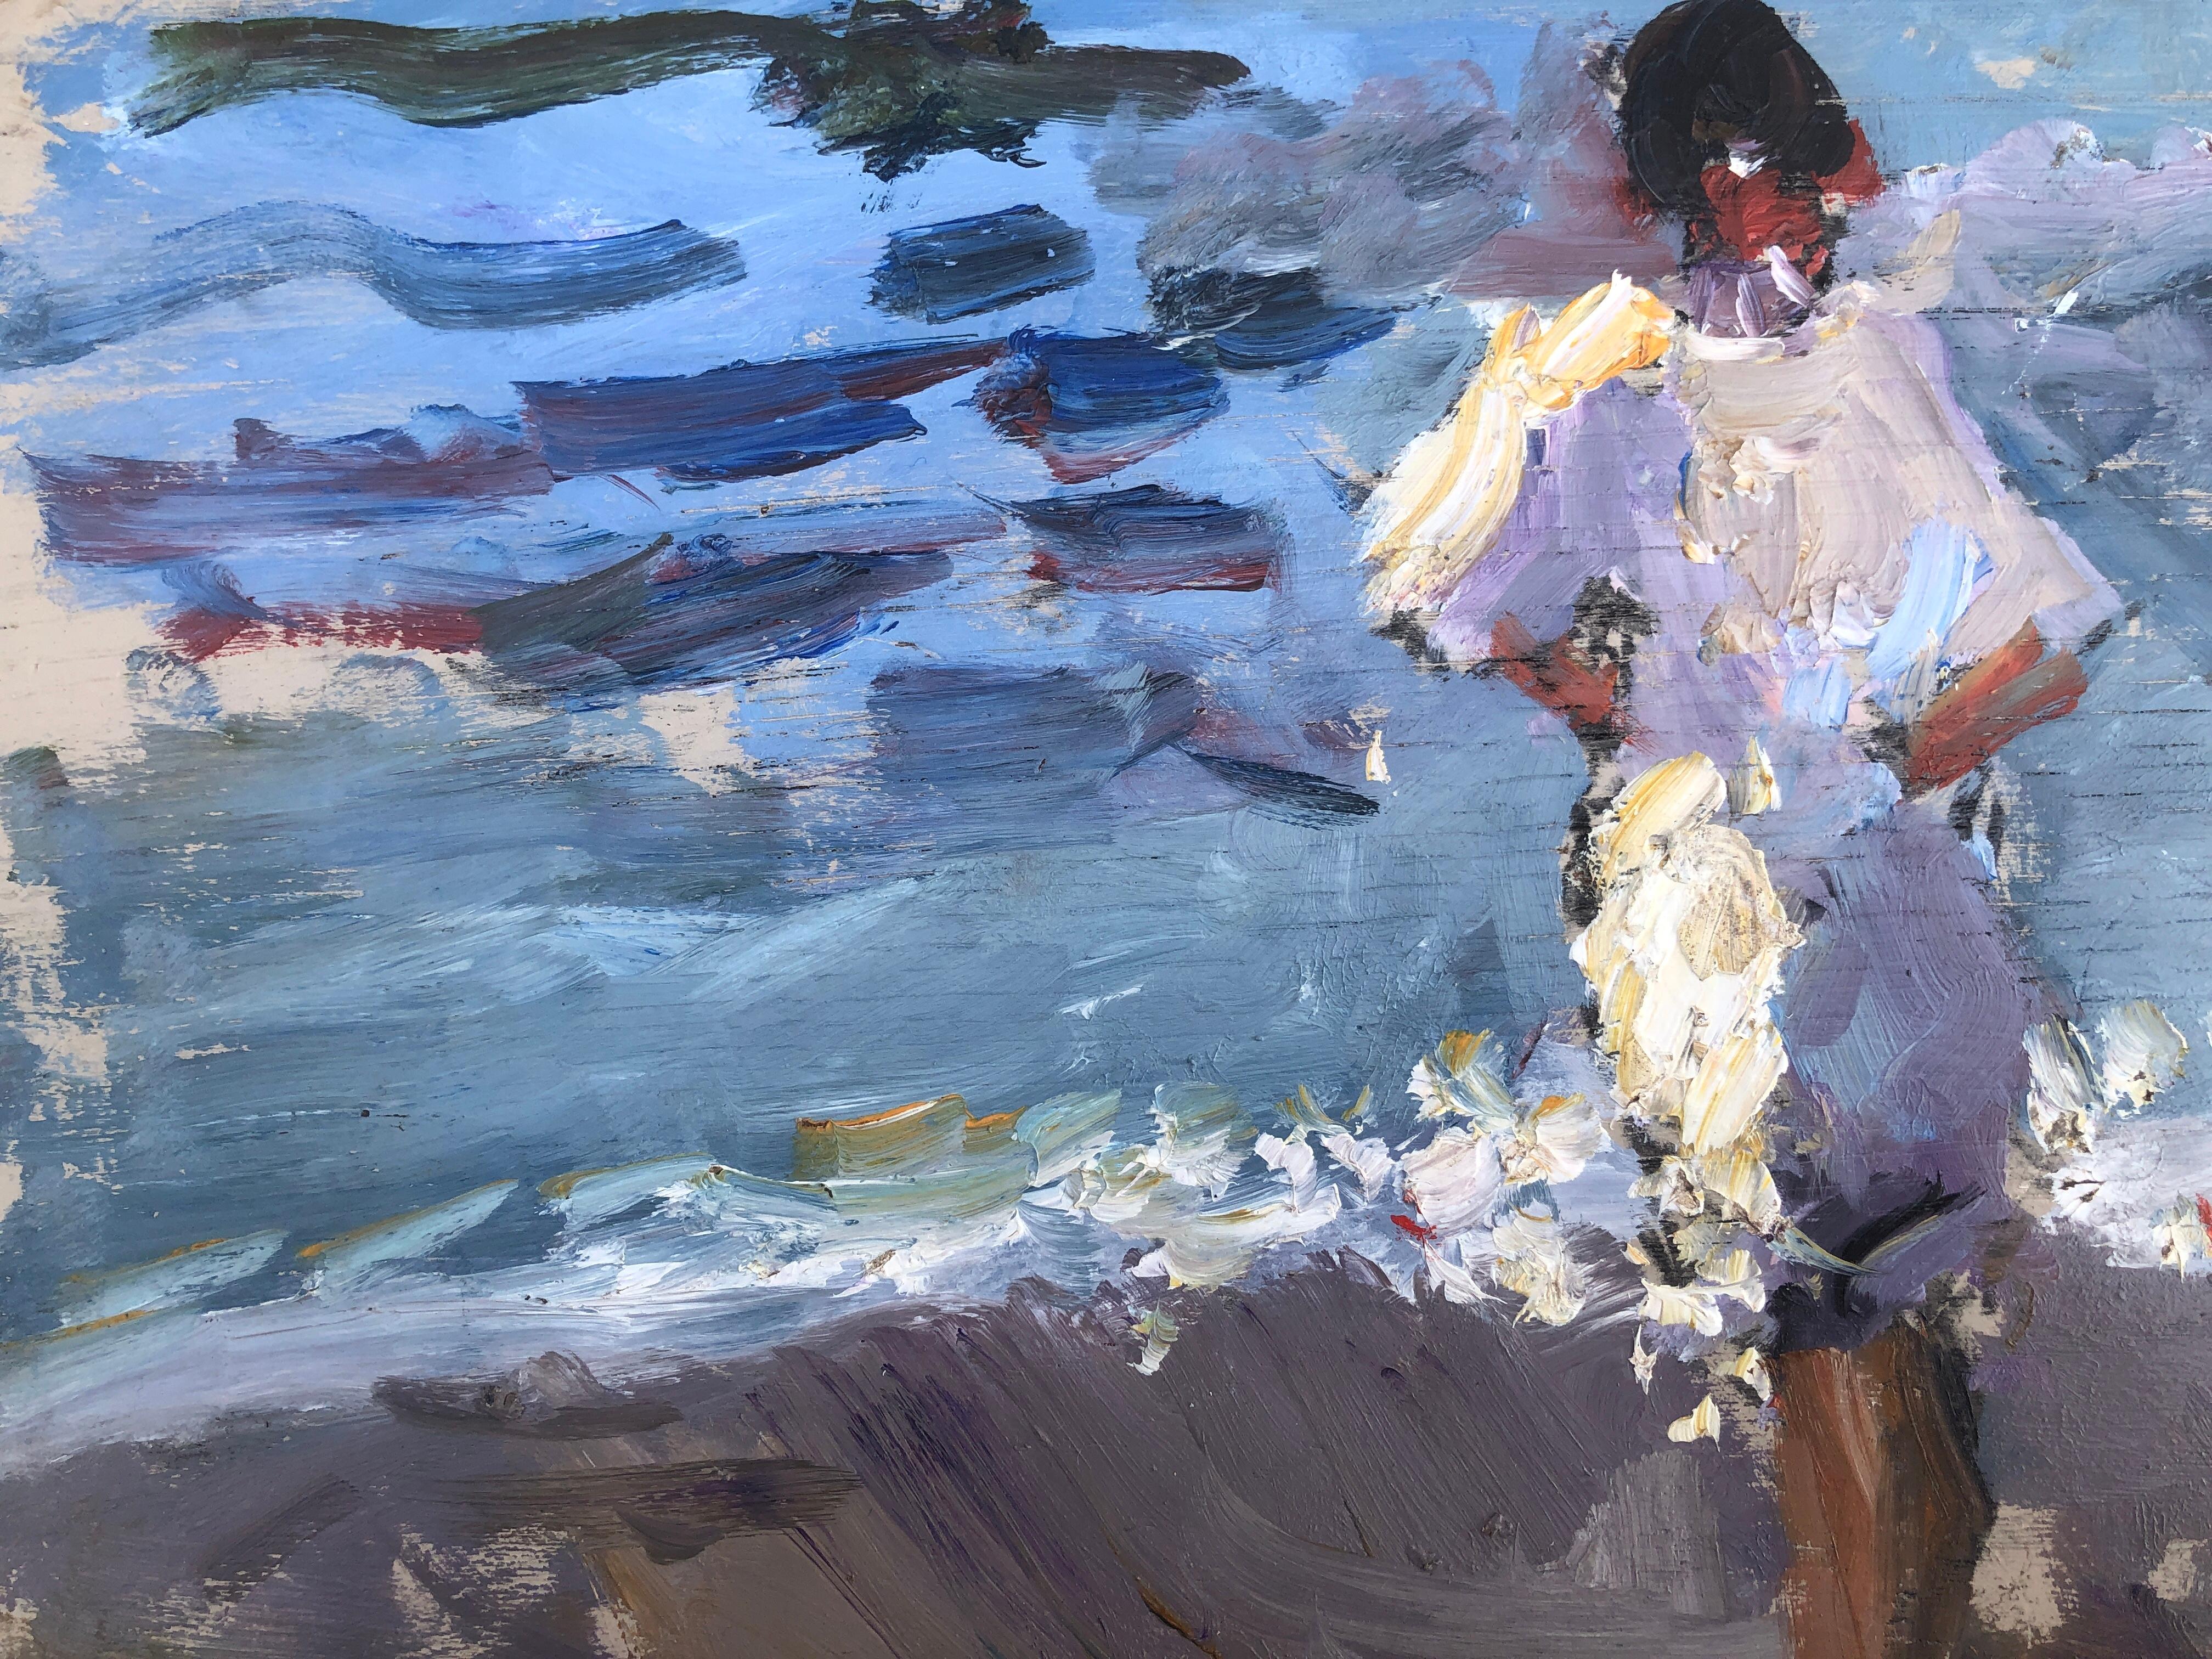 Woman on the beach of Valencia Spain oil on board painting impressionist - Gray Figurative Painting by Joan Vives Maristany